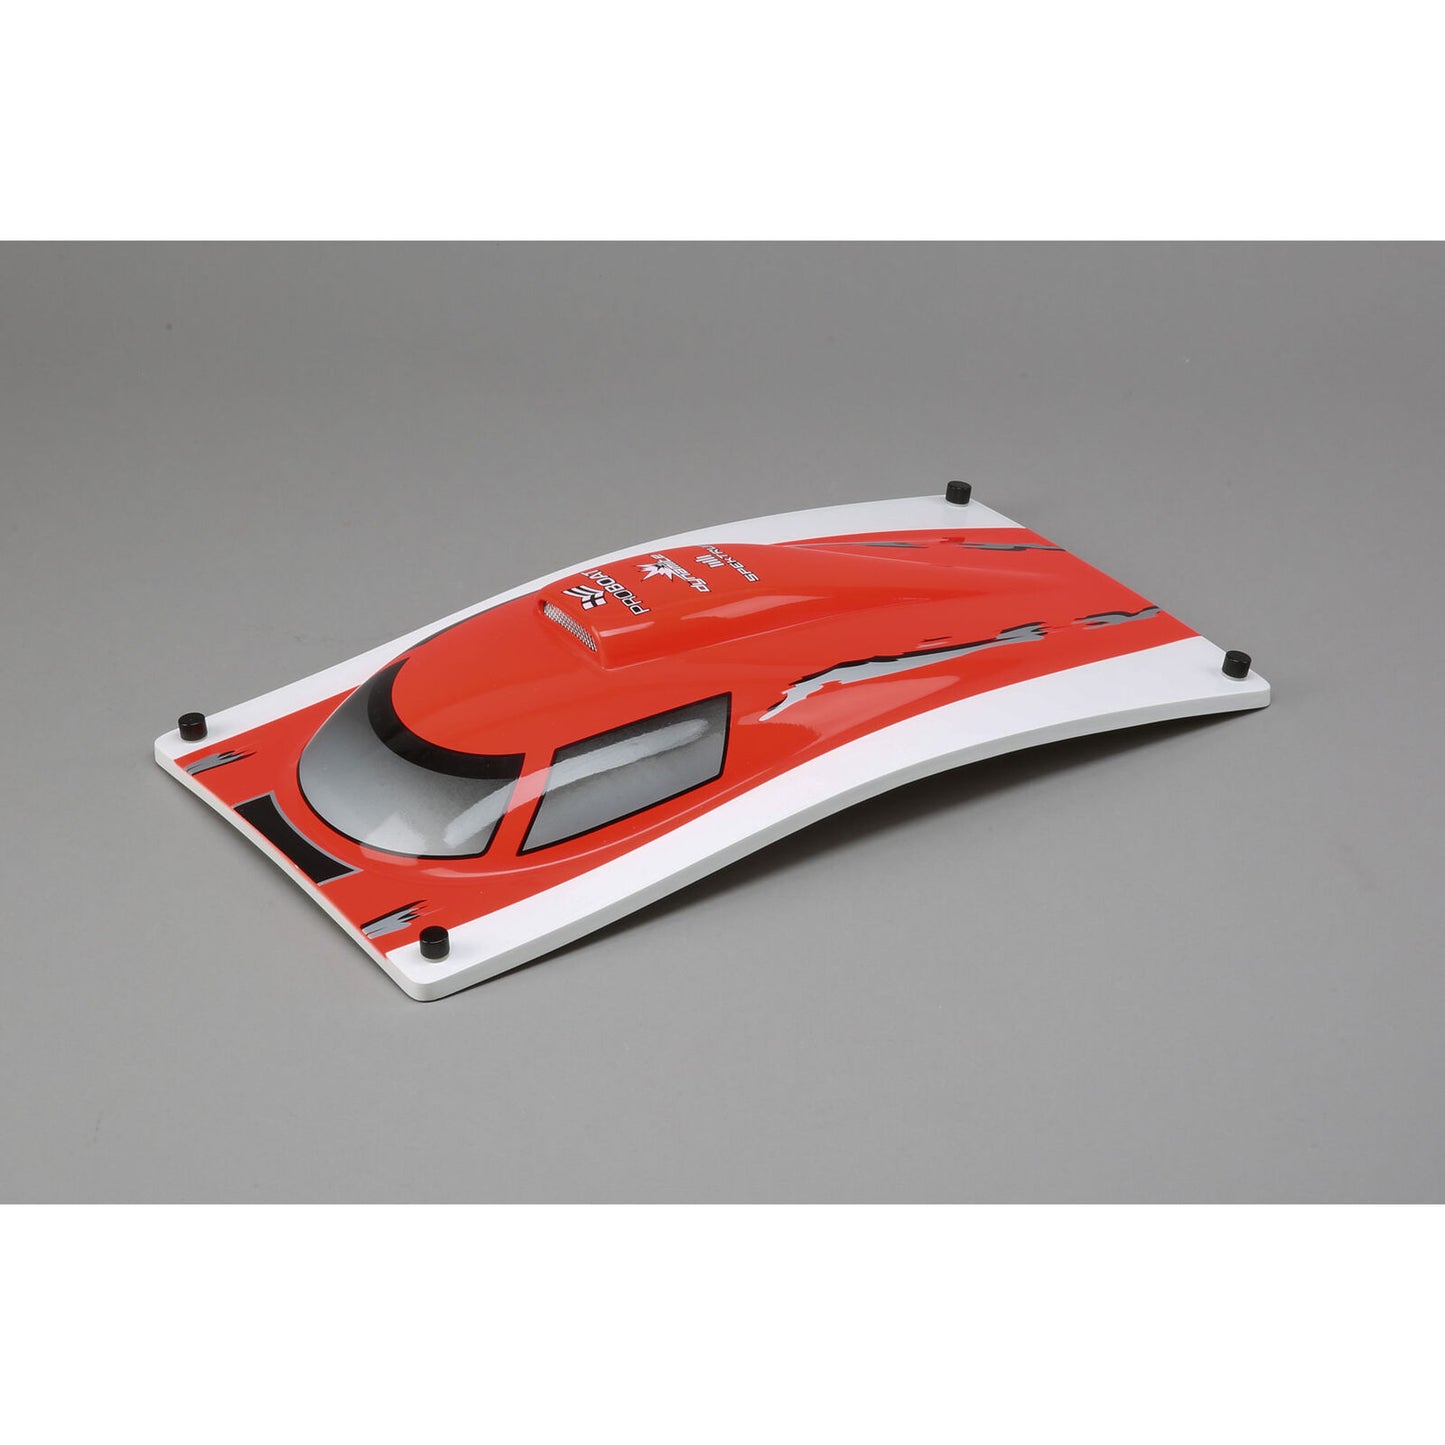 PRB281049    Zelos G 48" Gas Powered Catamaran  HULL ONLY  W/ CANOPY  ($100 shipping included plus $14 handling )